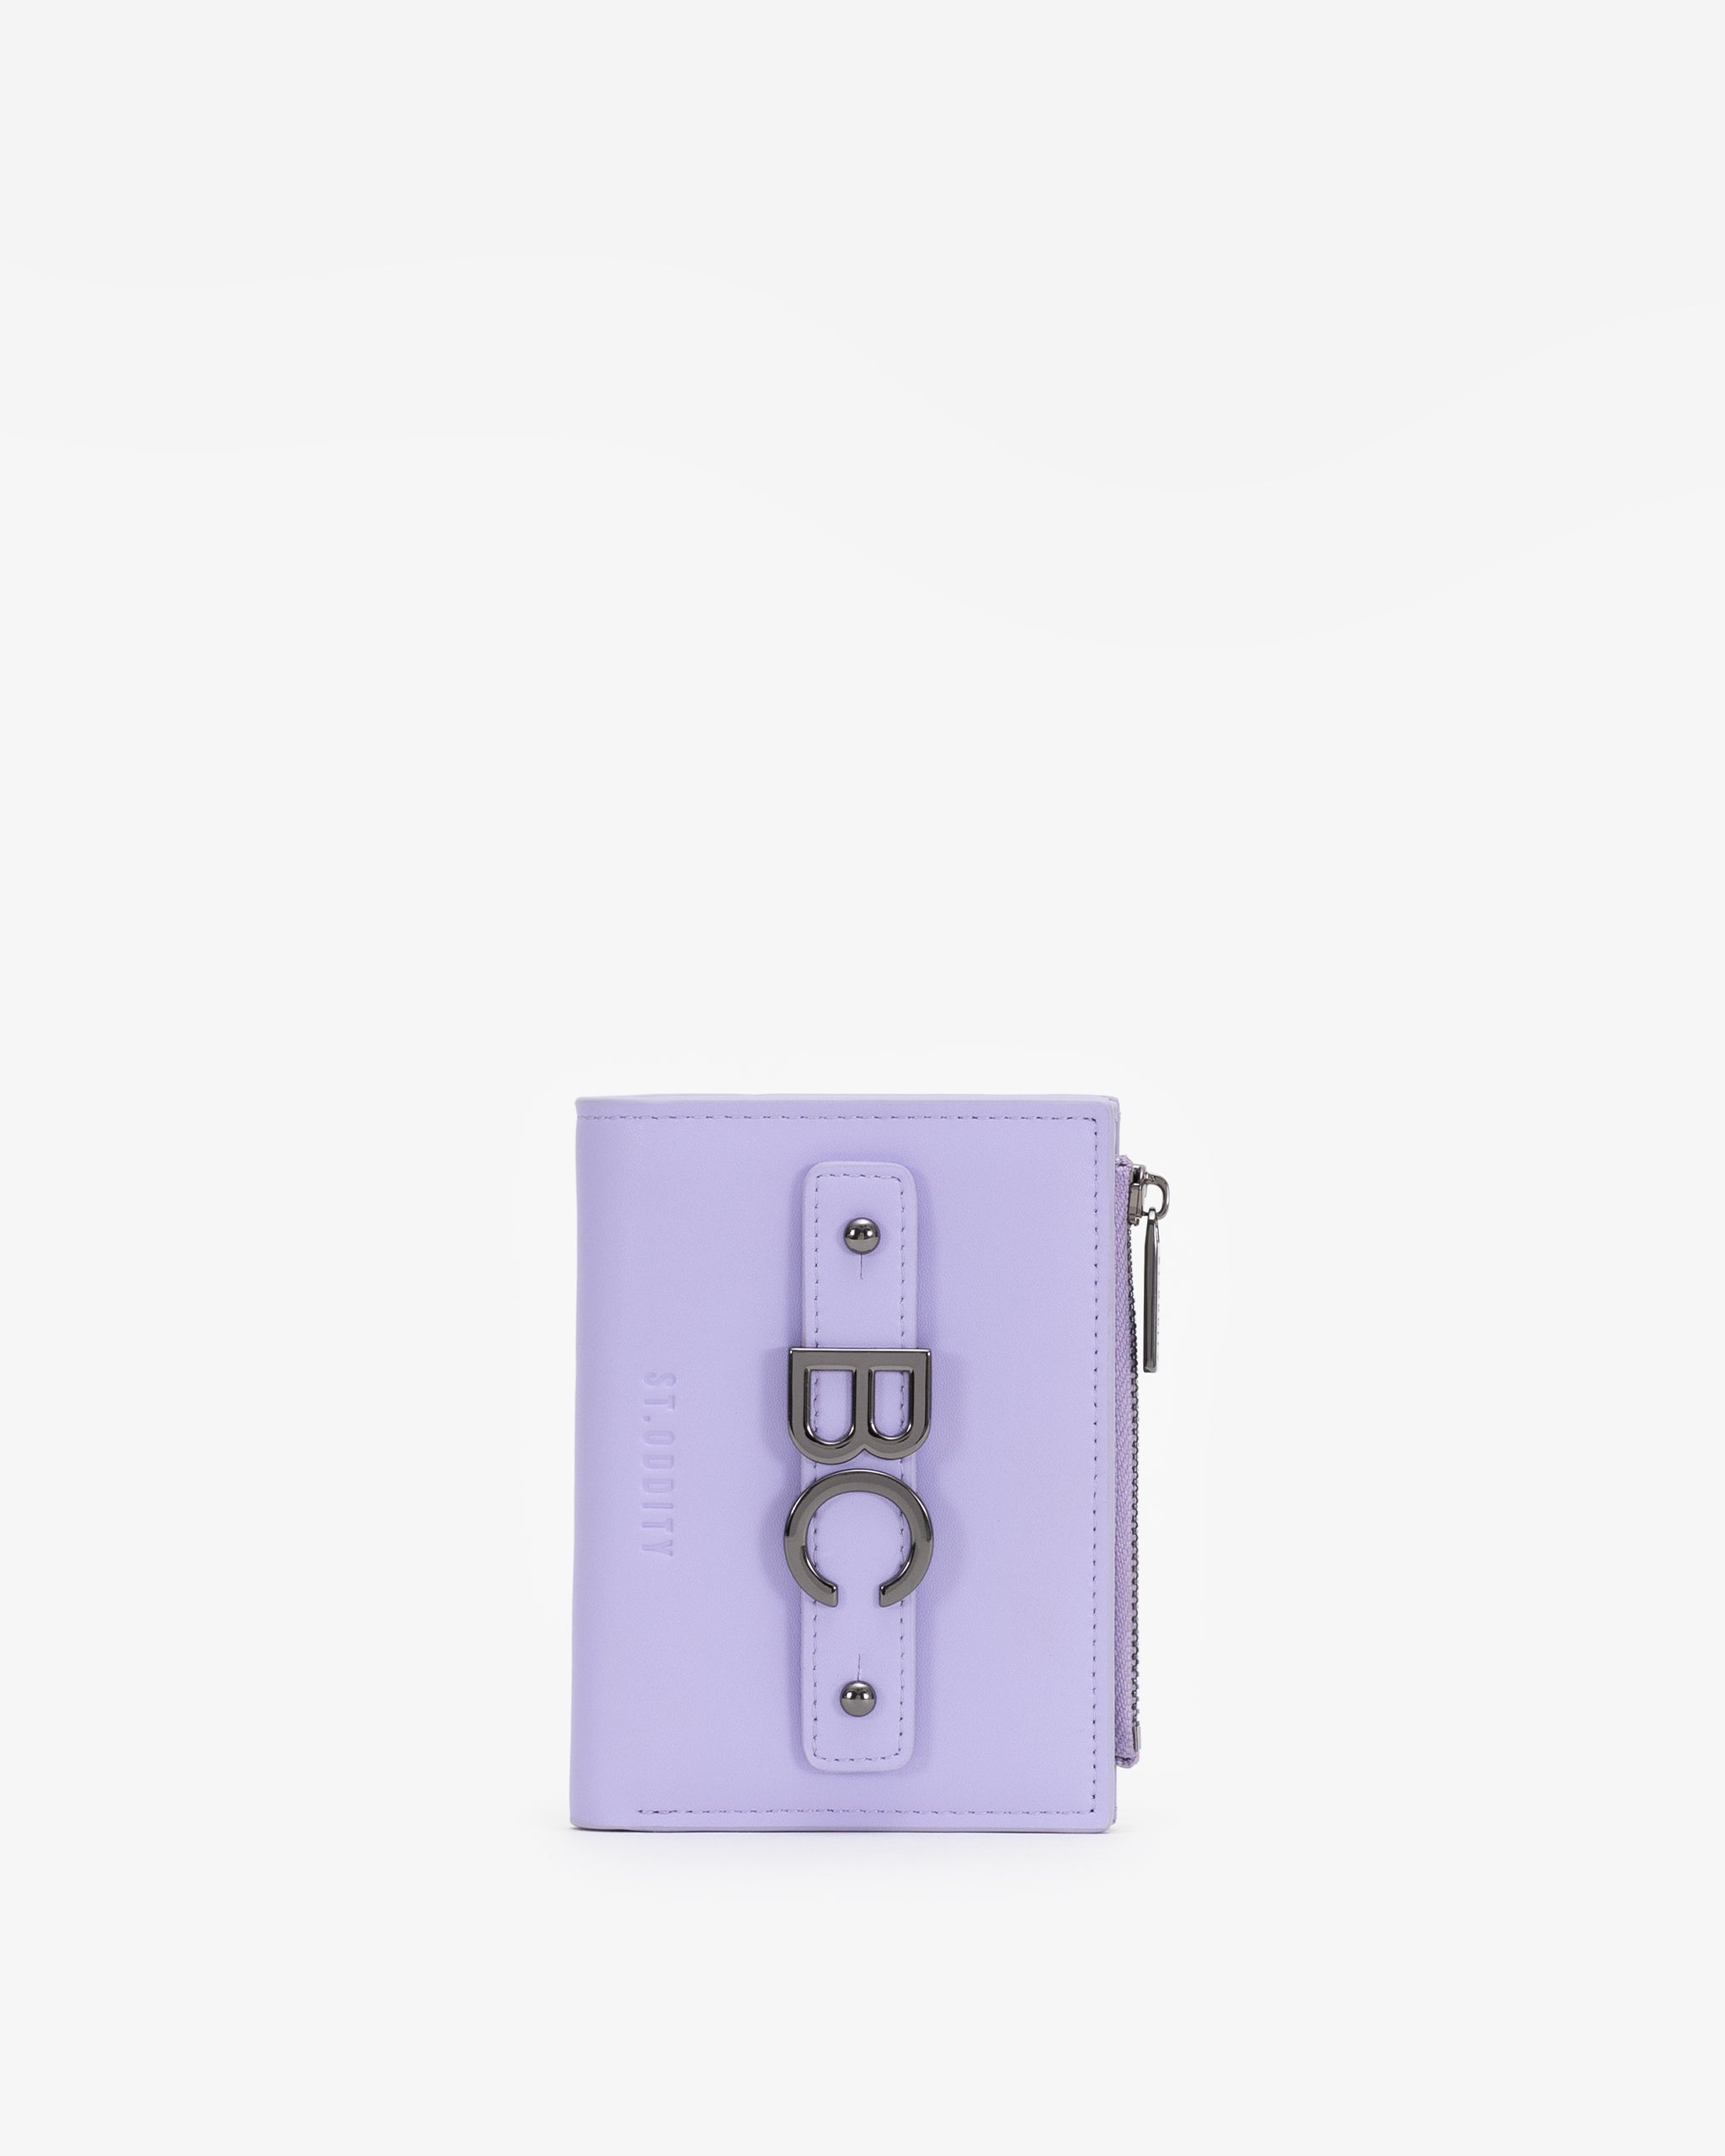 Pre-order (Mid-May): Wallet in Lavender with Personalised Hardware